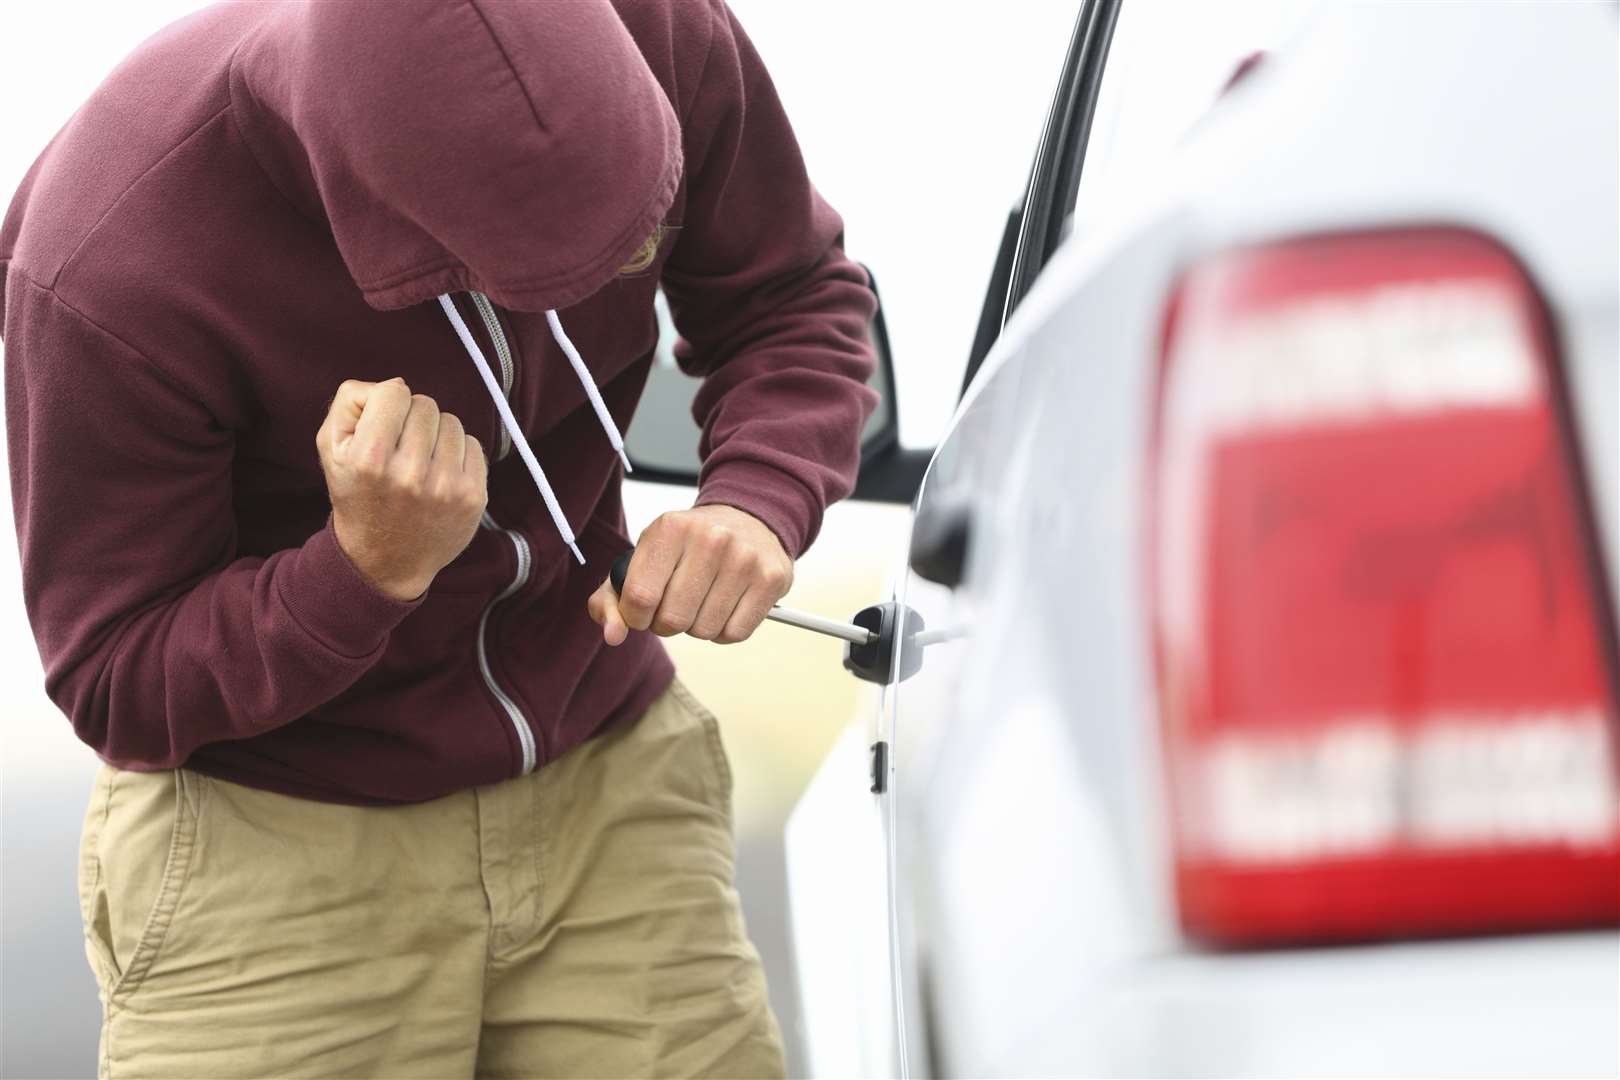 Police are hunting for a car thief after seven incidents were reported across Dartford. Picture: Thinkstock